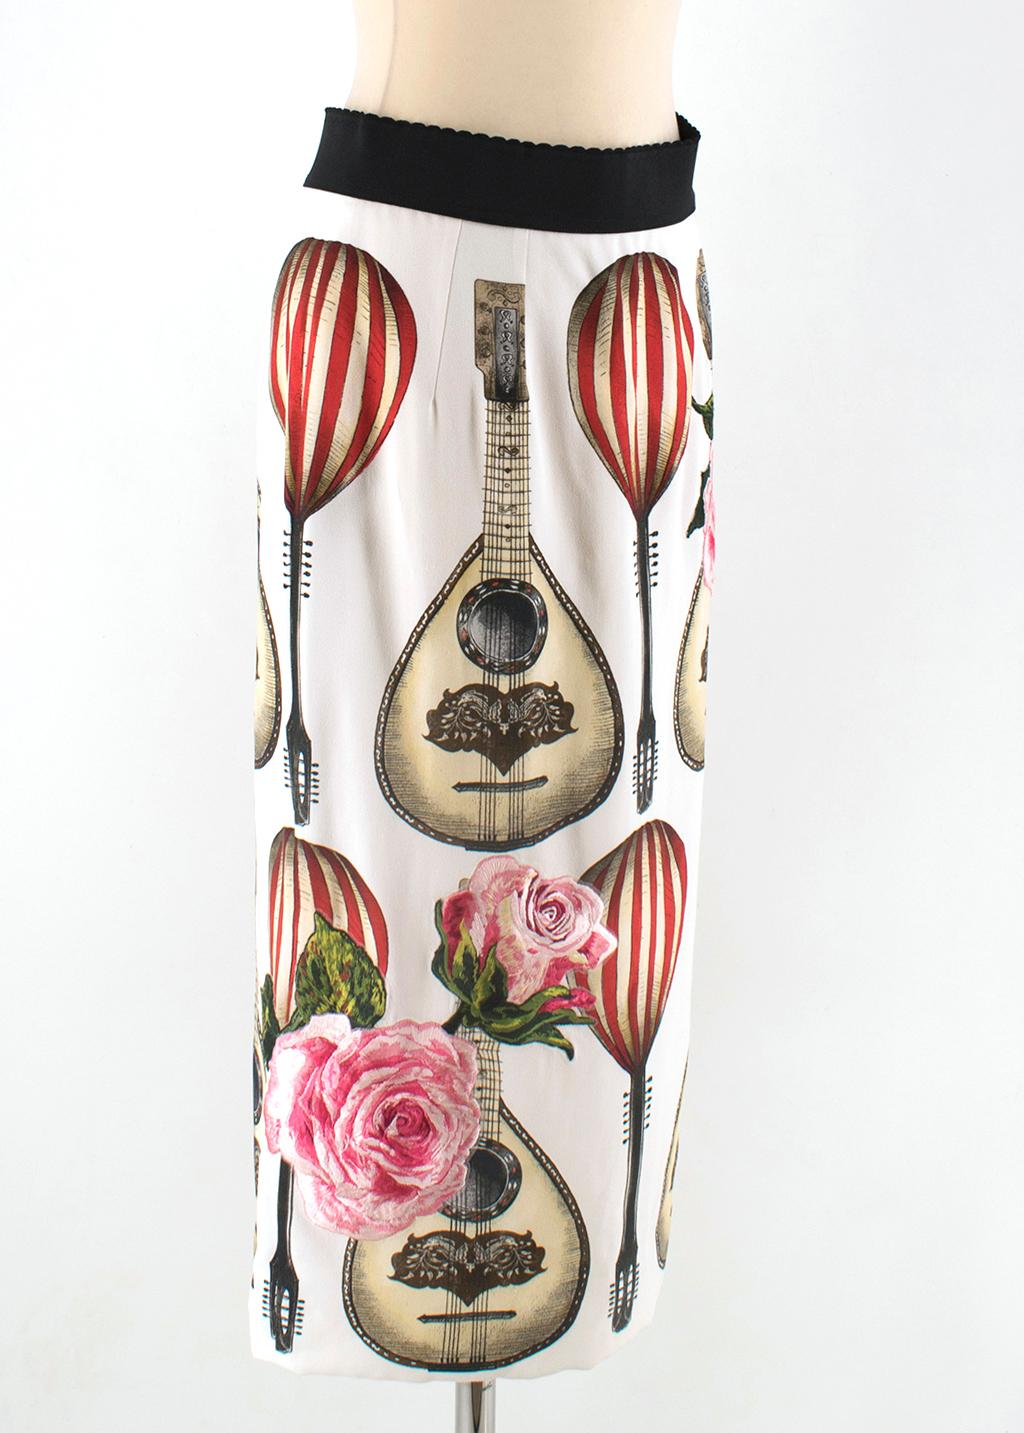 Dolce & Gabbana Mandolin Print Pencil Skirt

- Black elastic waist
- Zipper and hook in back (good condition)
- Vent in back
- Hot air balloon, guitar, and rose pattern
- Roses are embroidered

Please note, these items are pre-owned and may show